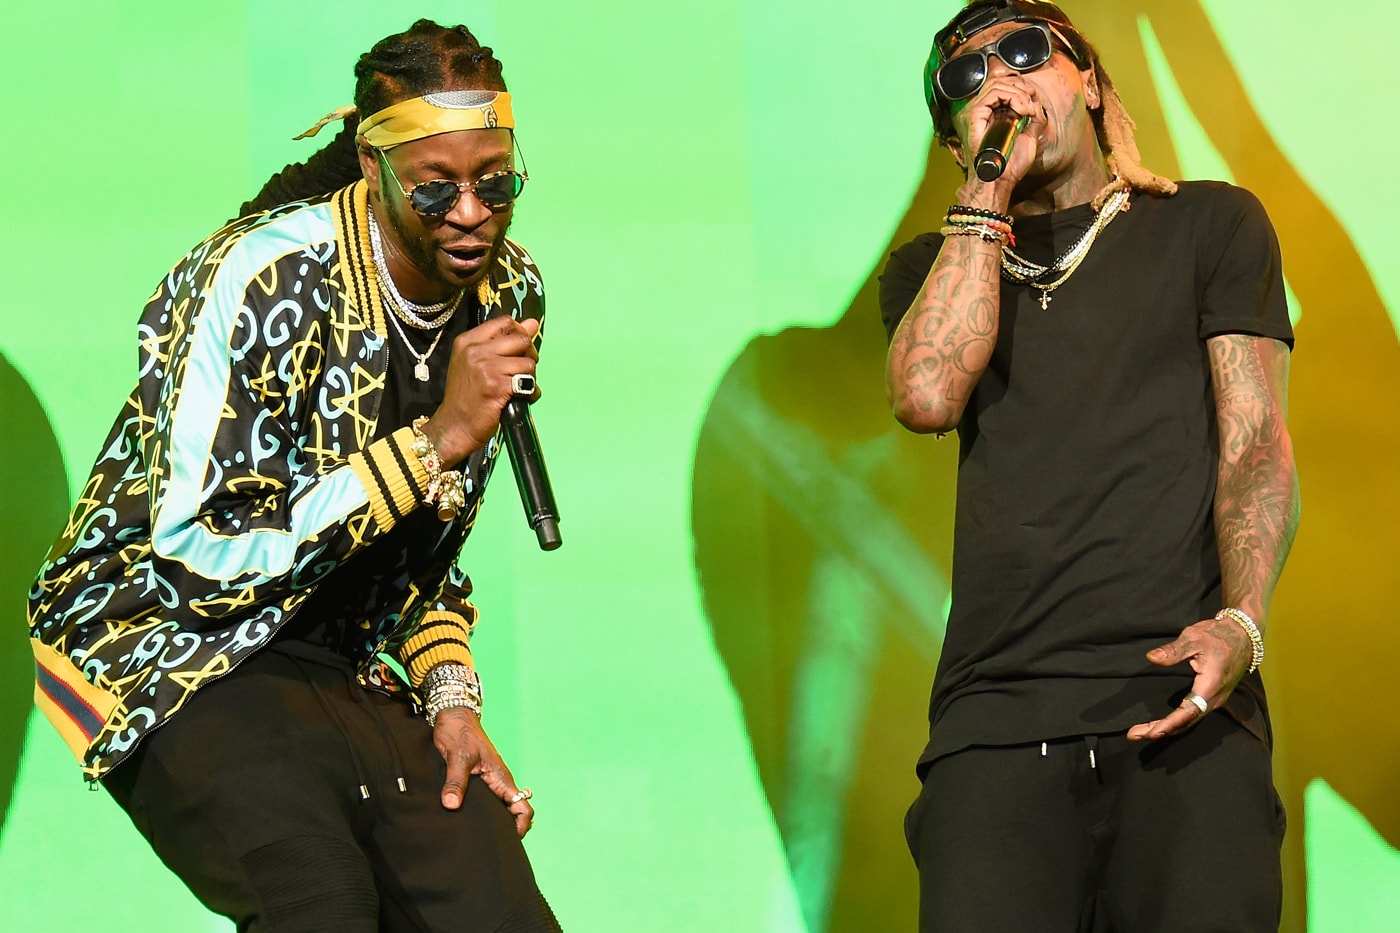 Lil Wayne and 2 Chainz Tease New Track "Long Story Short" off 'Welcome 2 ColleGrove' Album rappers juicy j collaborative record